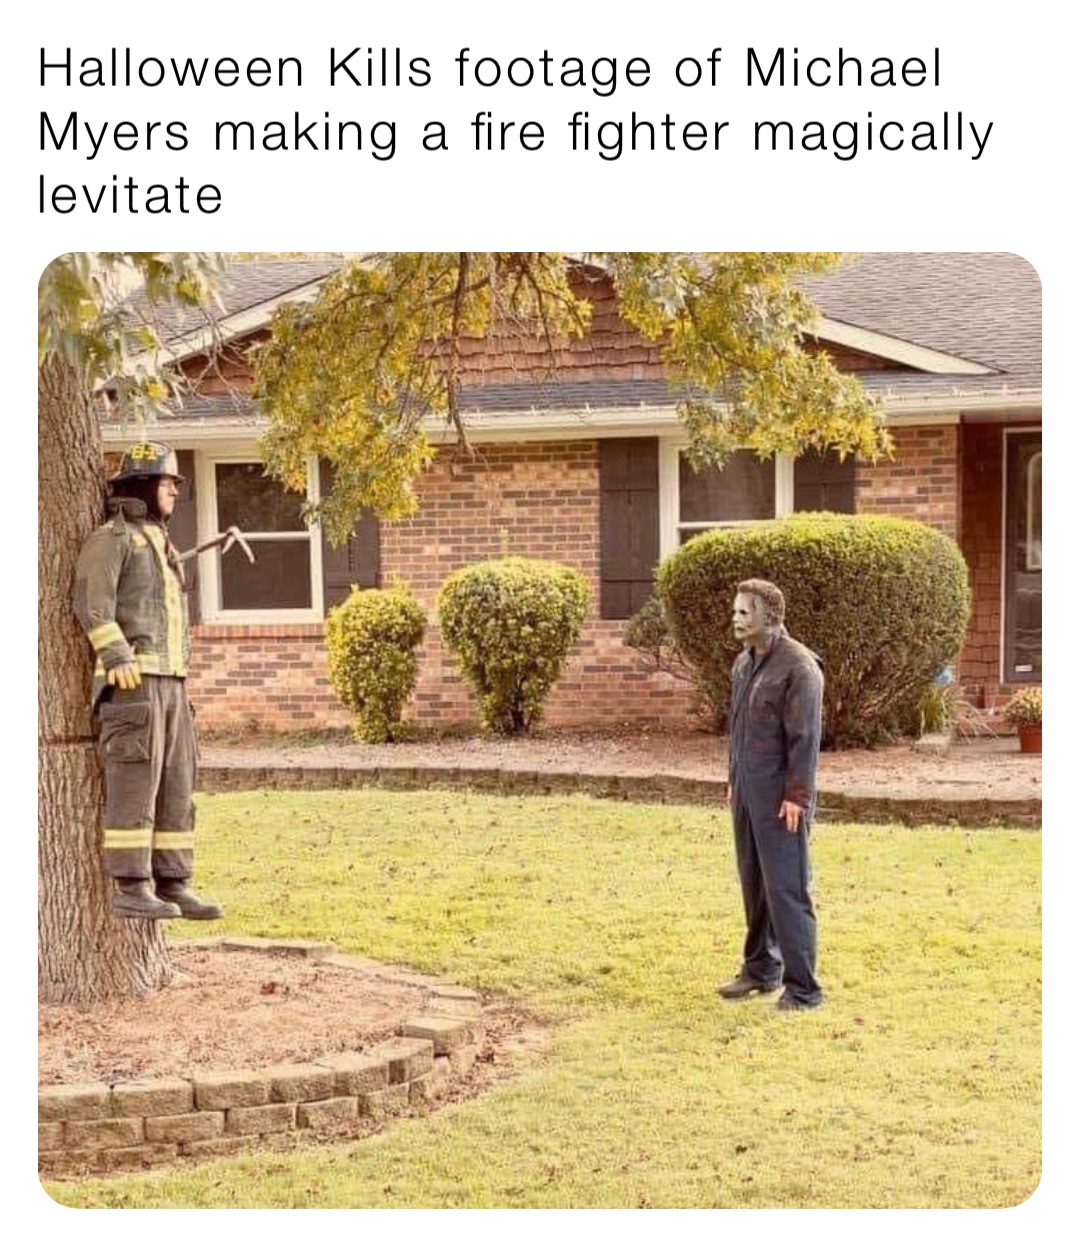 Halloween Kills footage of Michael Myers making a fire fighter magically levitate